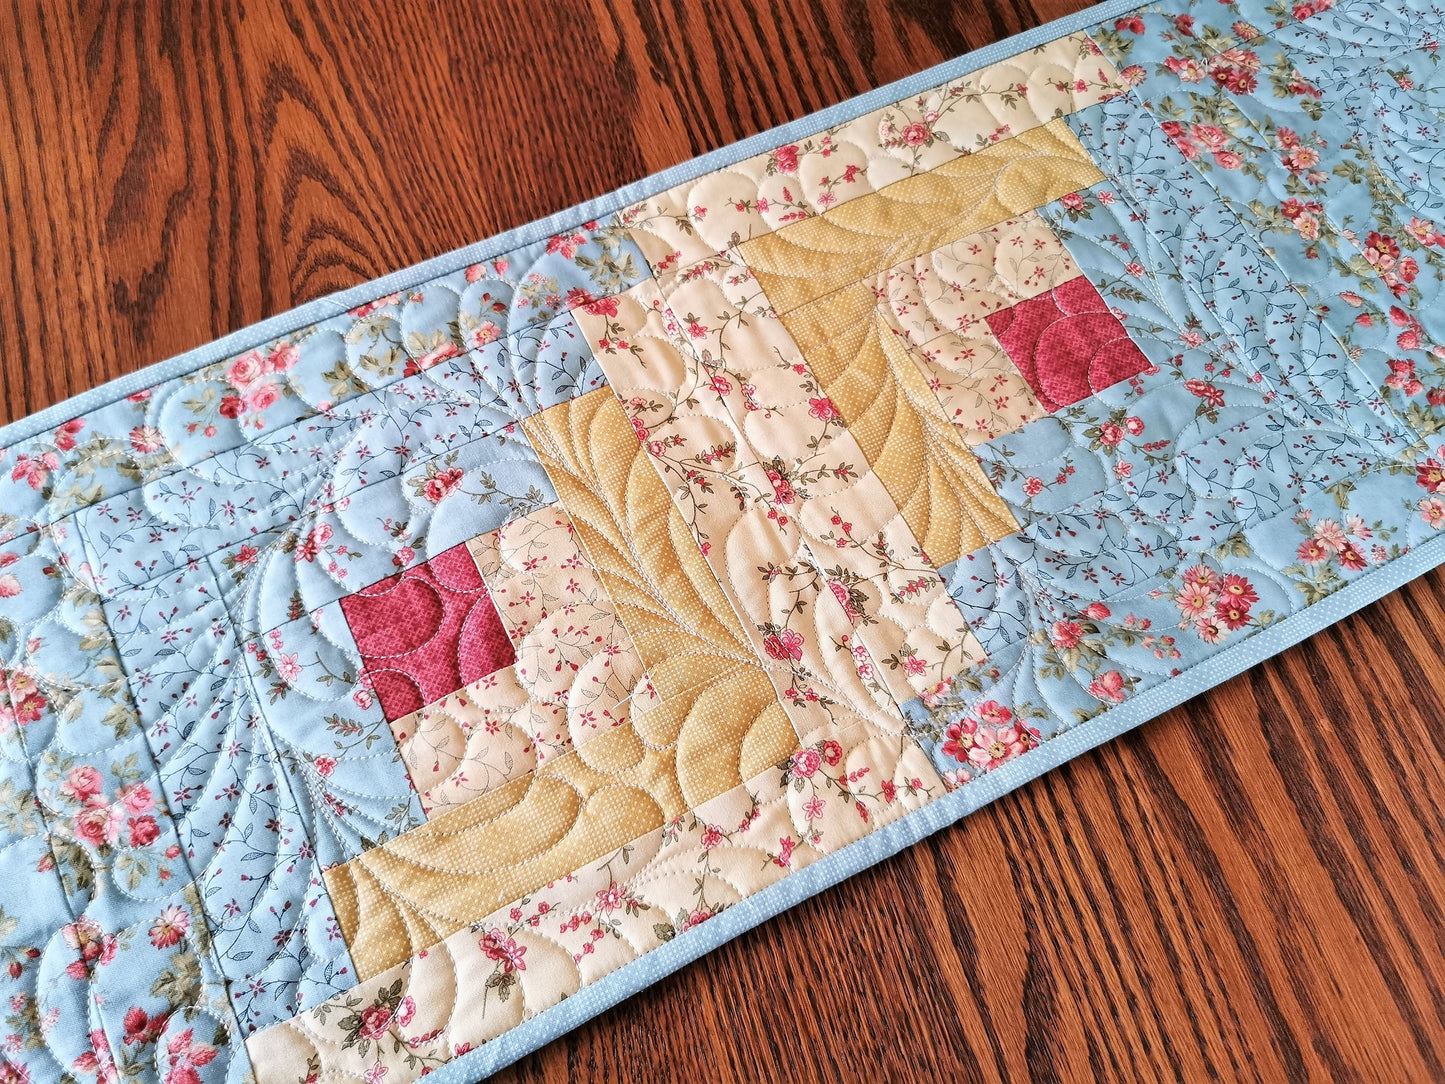 Log Cabin Quilted Table Runner in Teal and Yellow Florals